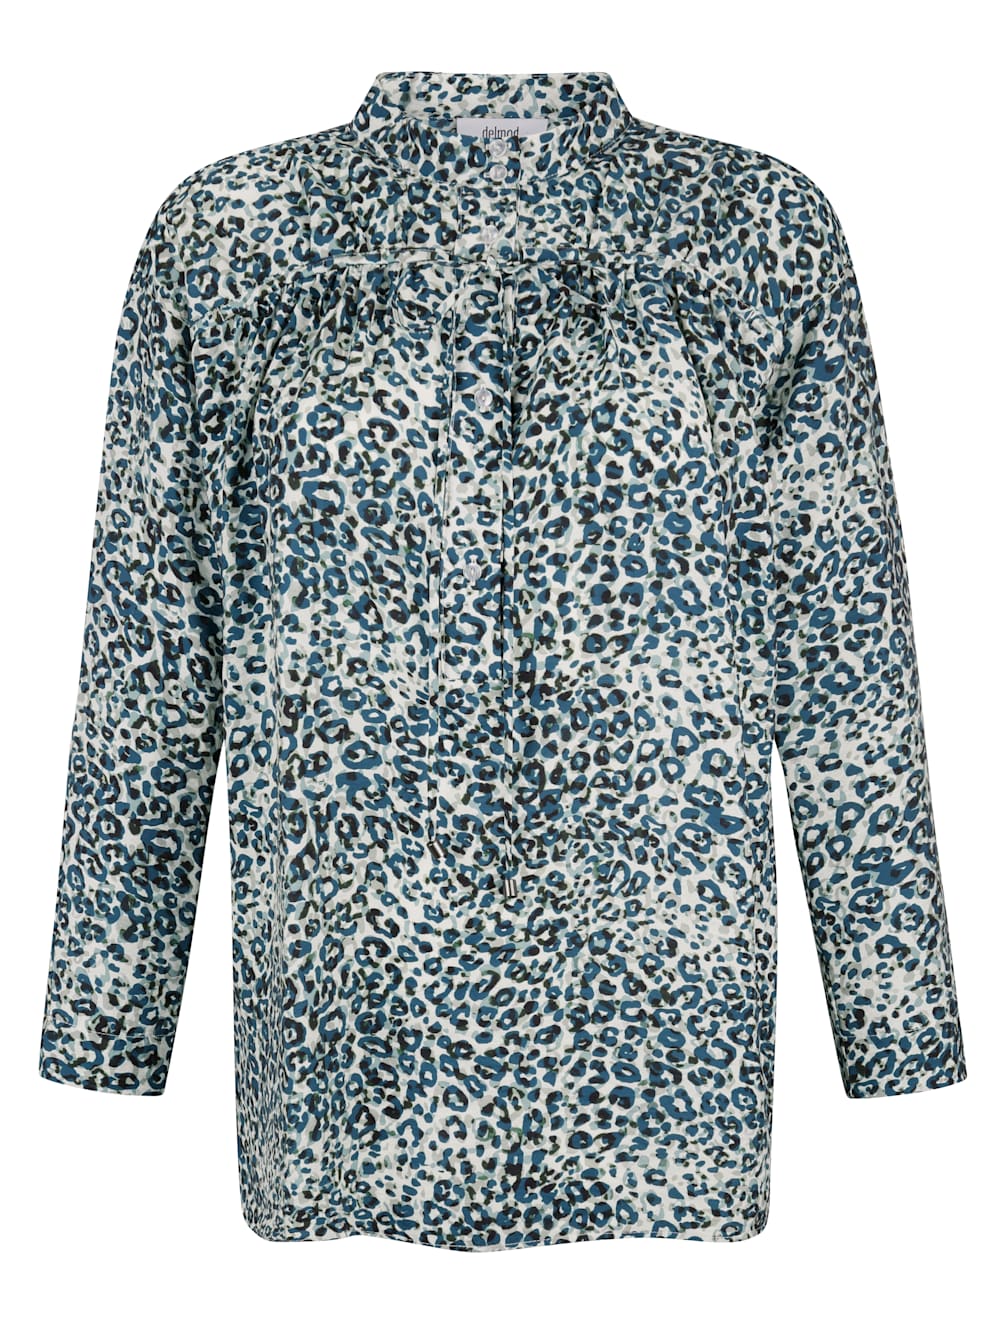 Meyer Delmod | pure in Leo-Muster tollem Mode Bluse